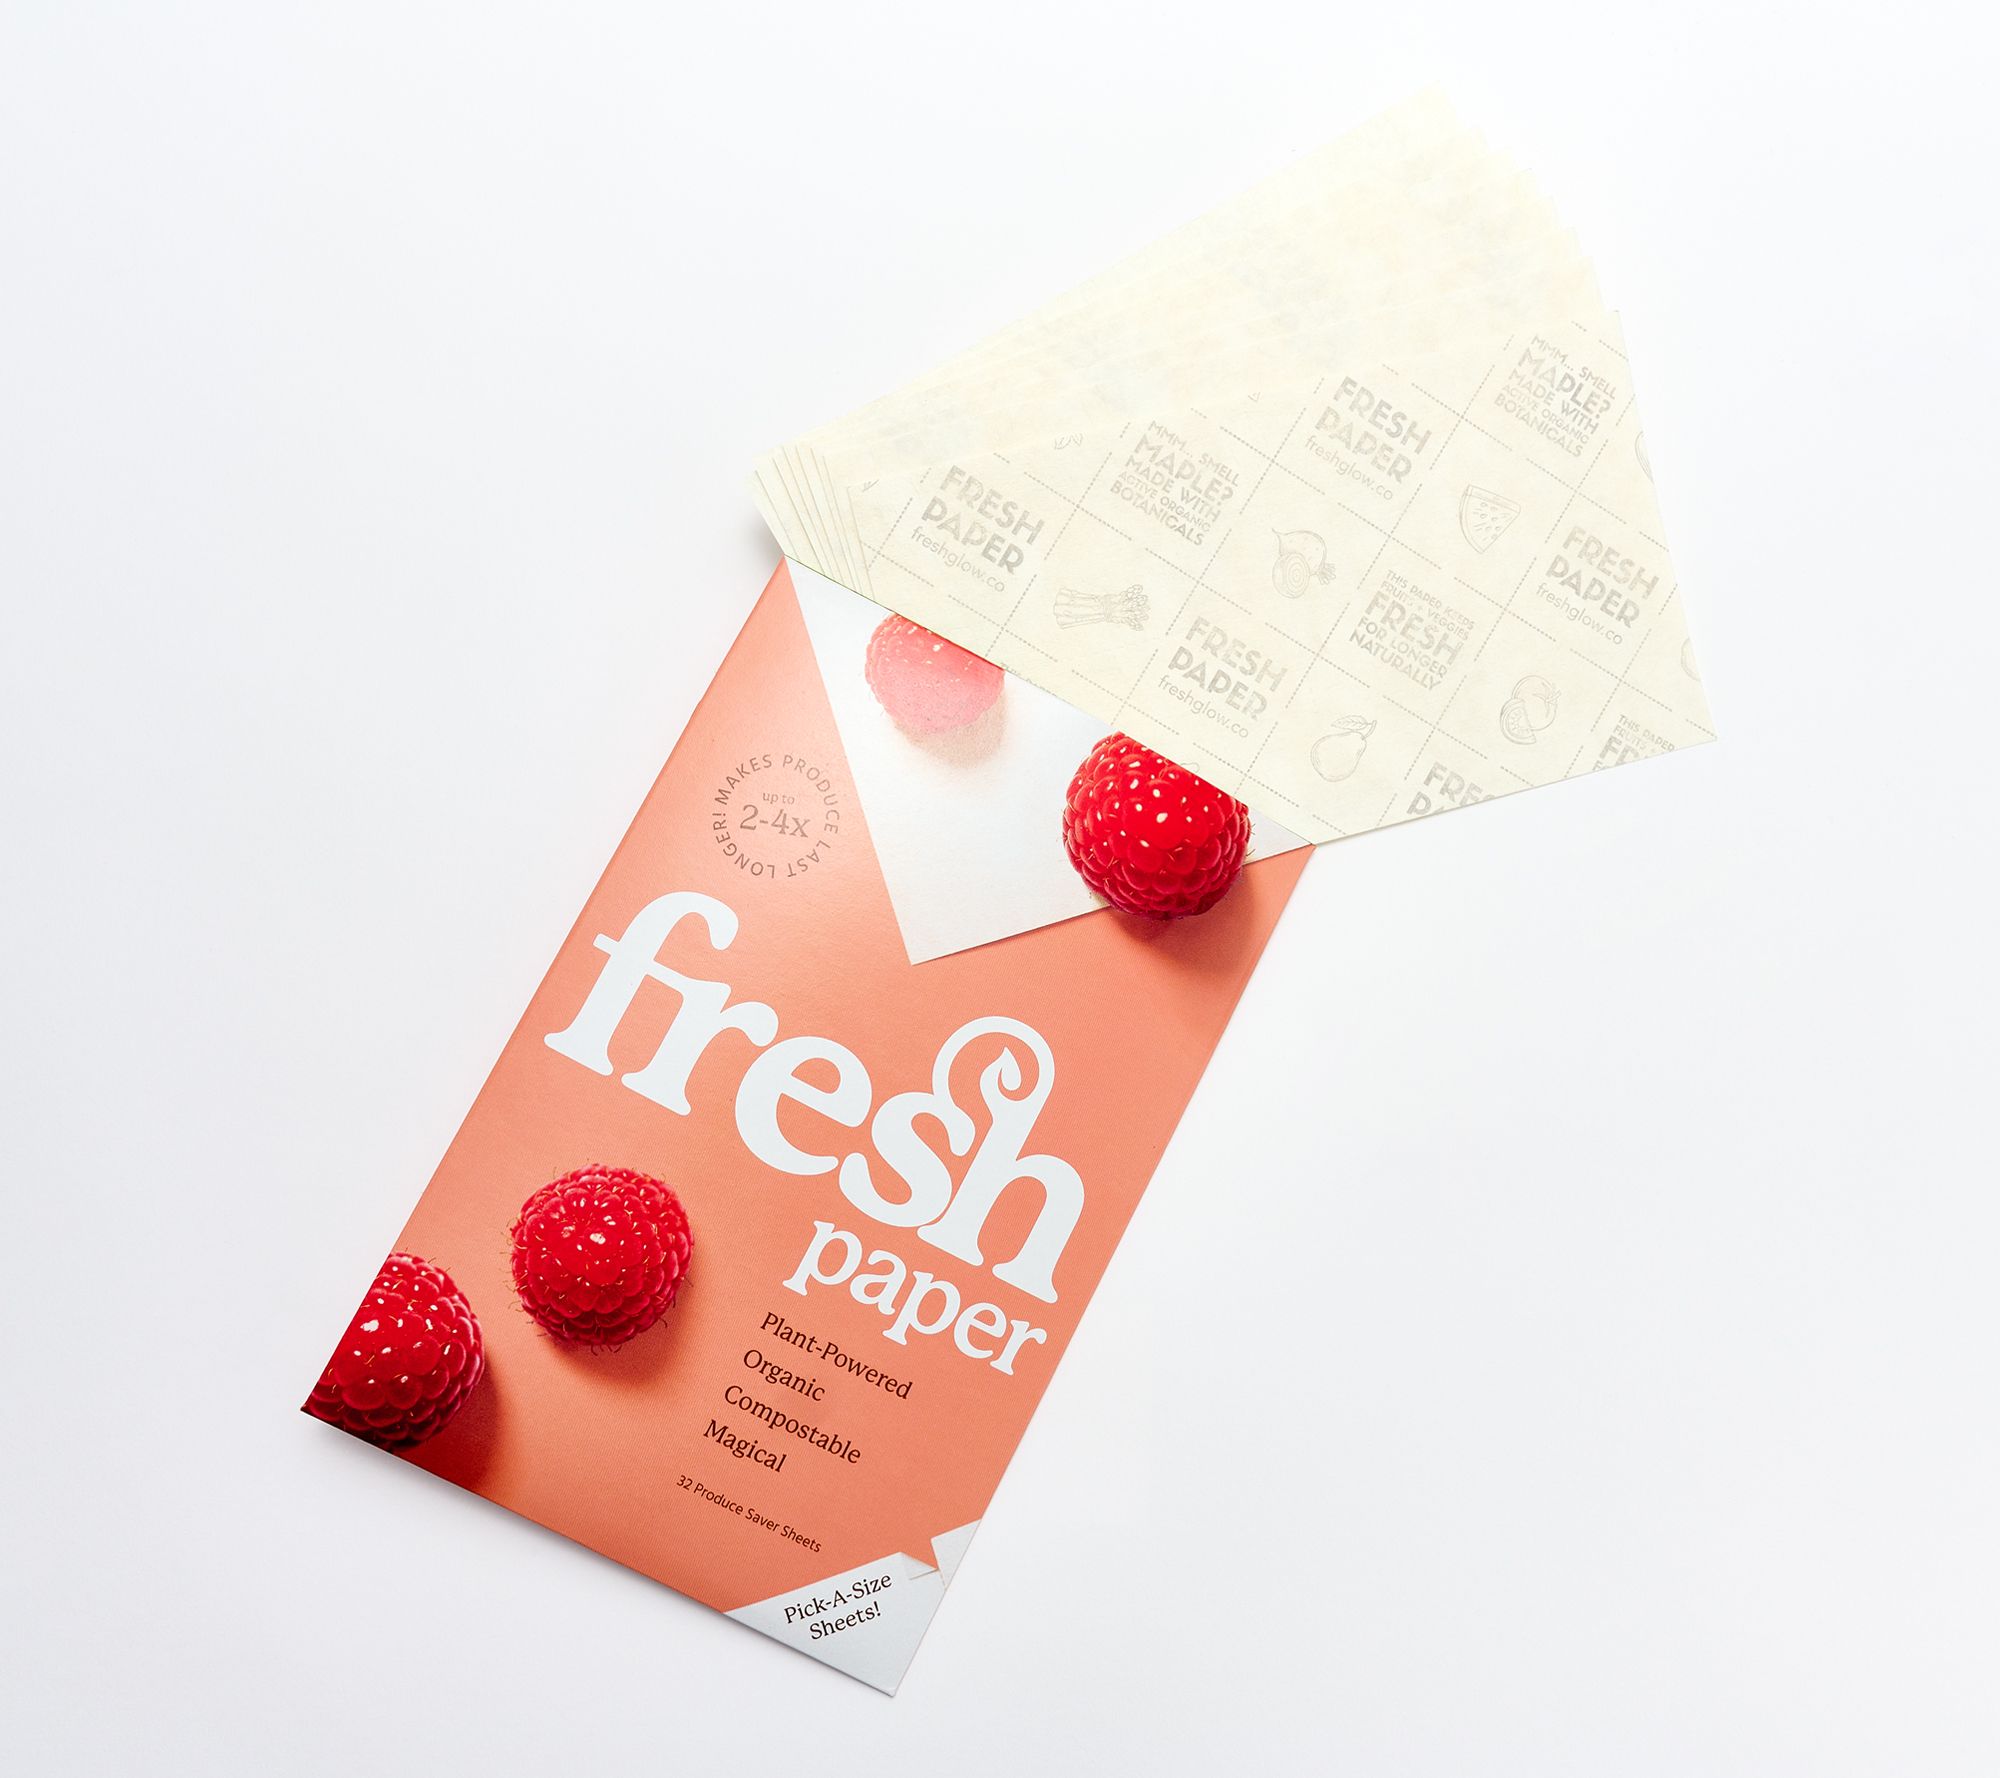 Fresh Paper Produce Storage Sheets 8 Pack at Whole Foods Market